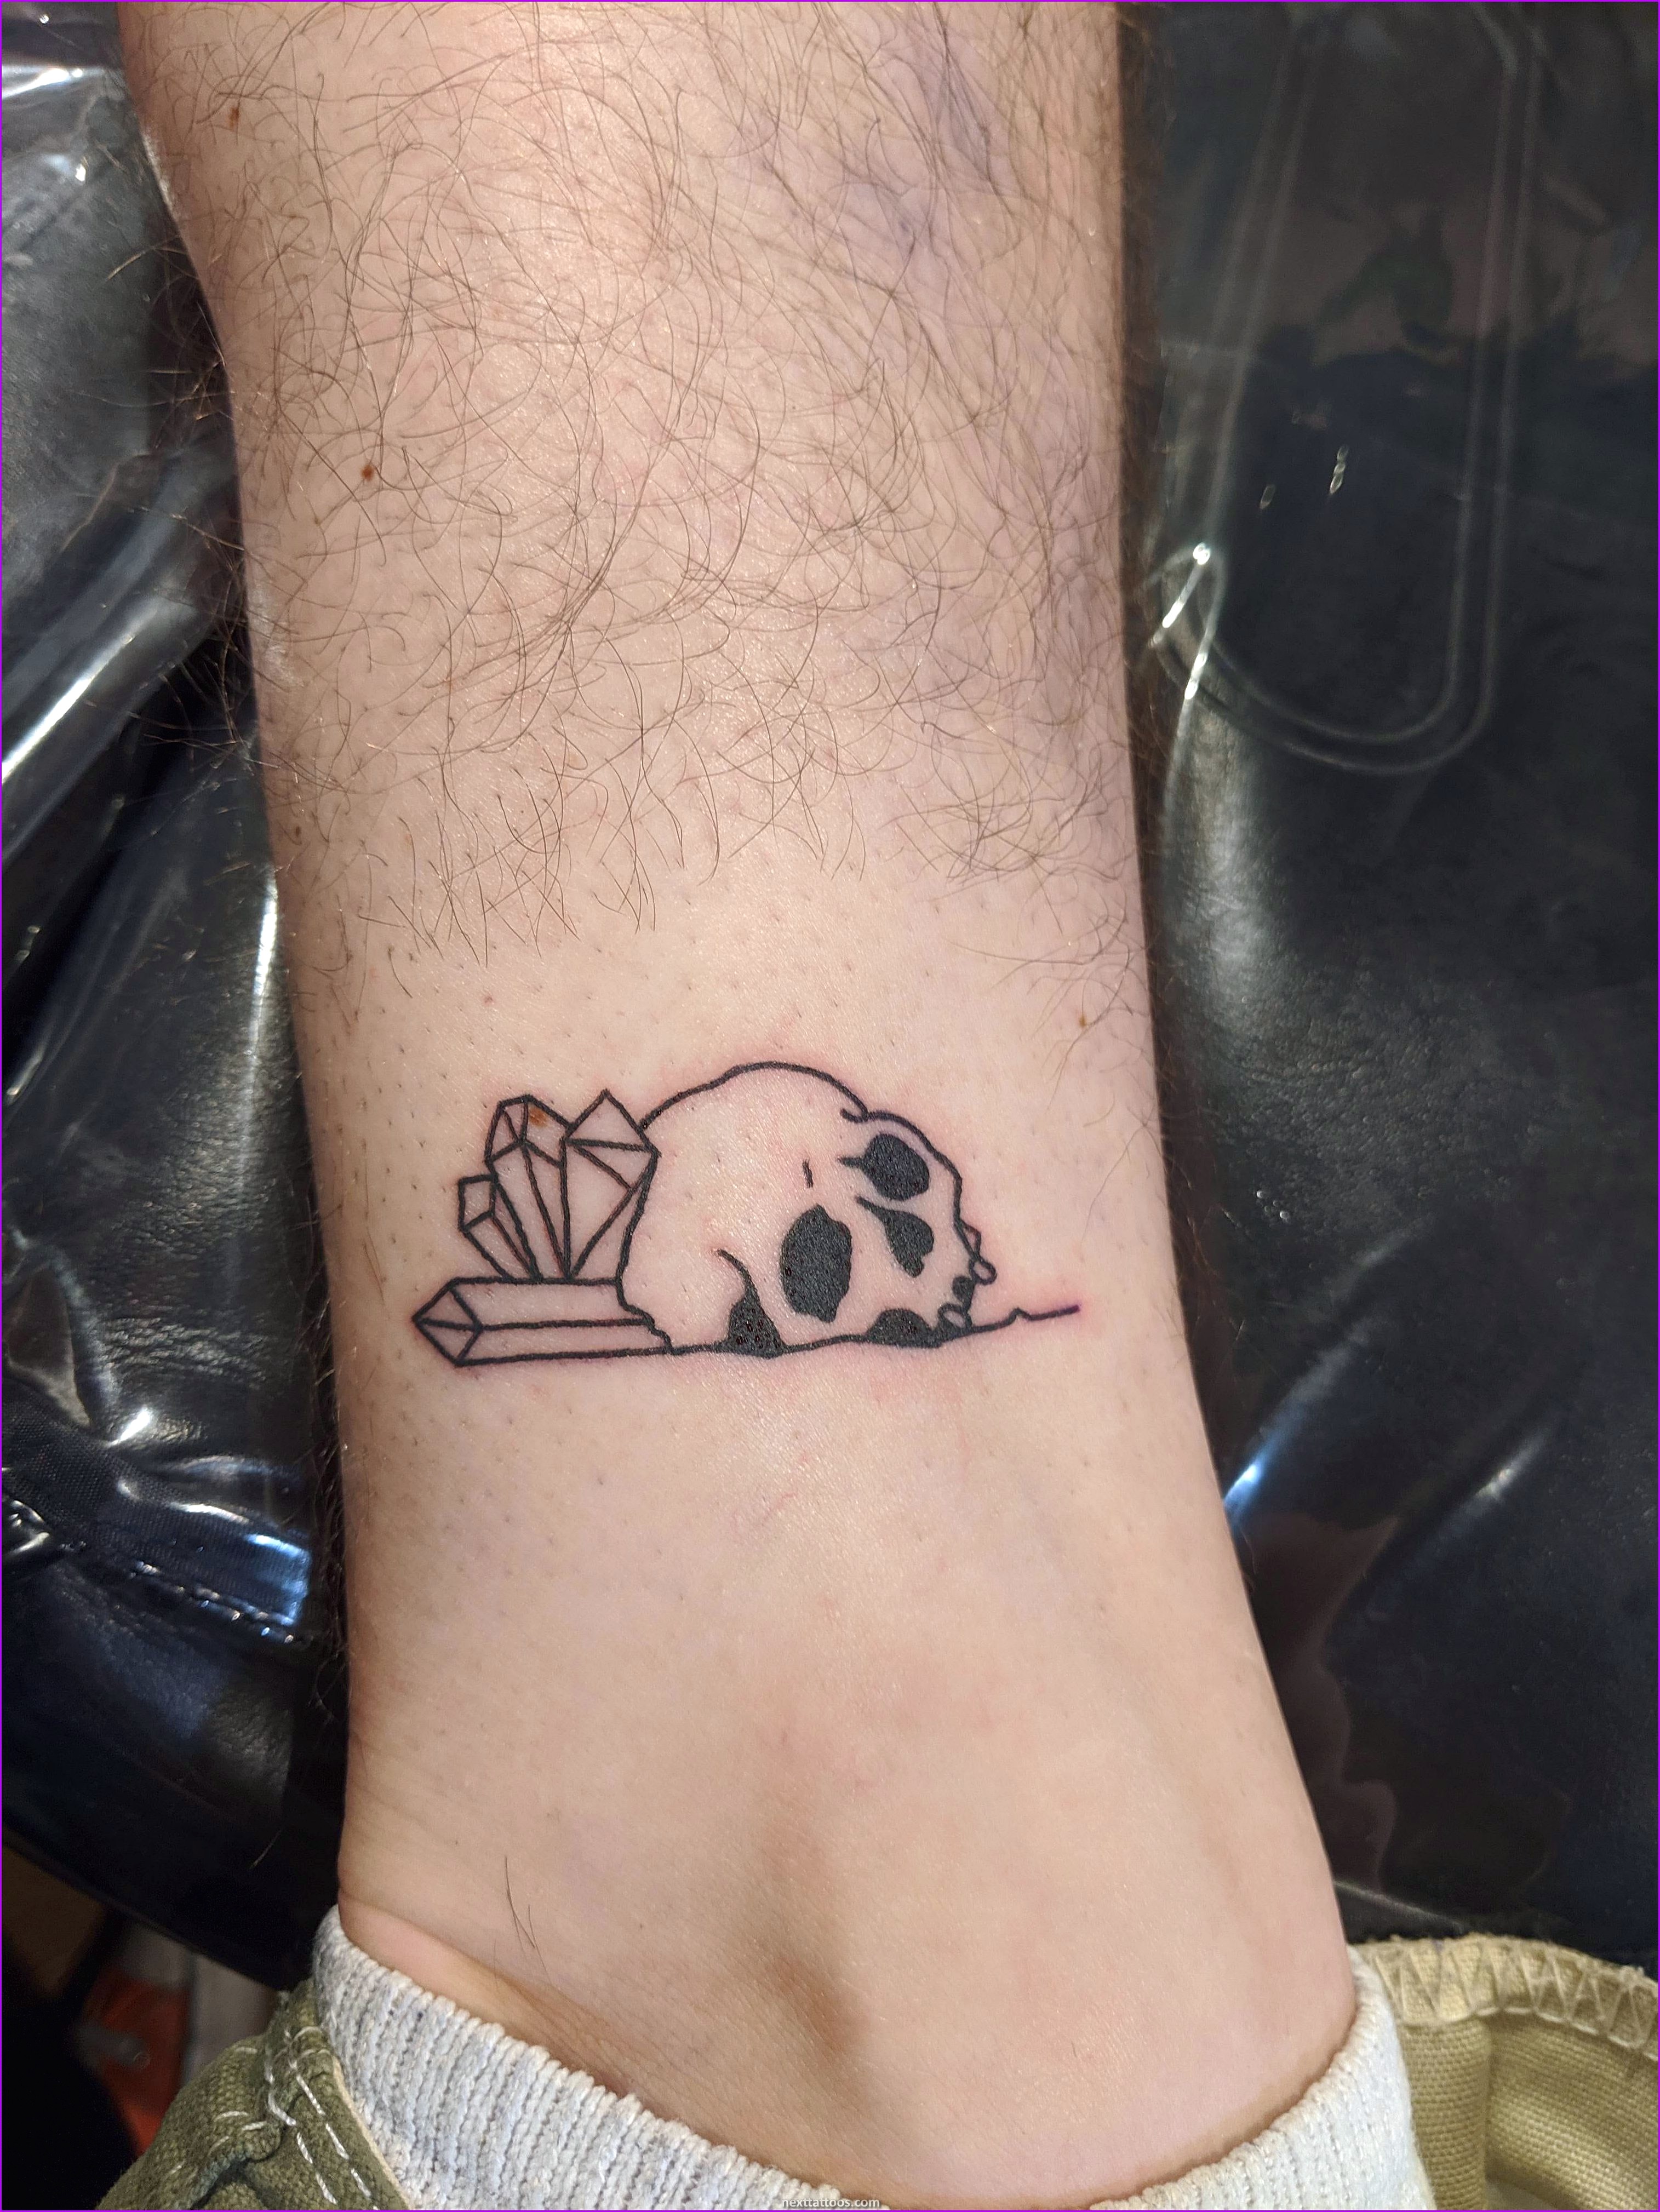 Friday the 13th Tattoos